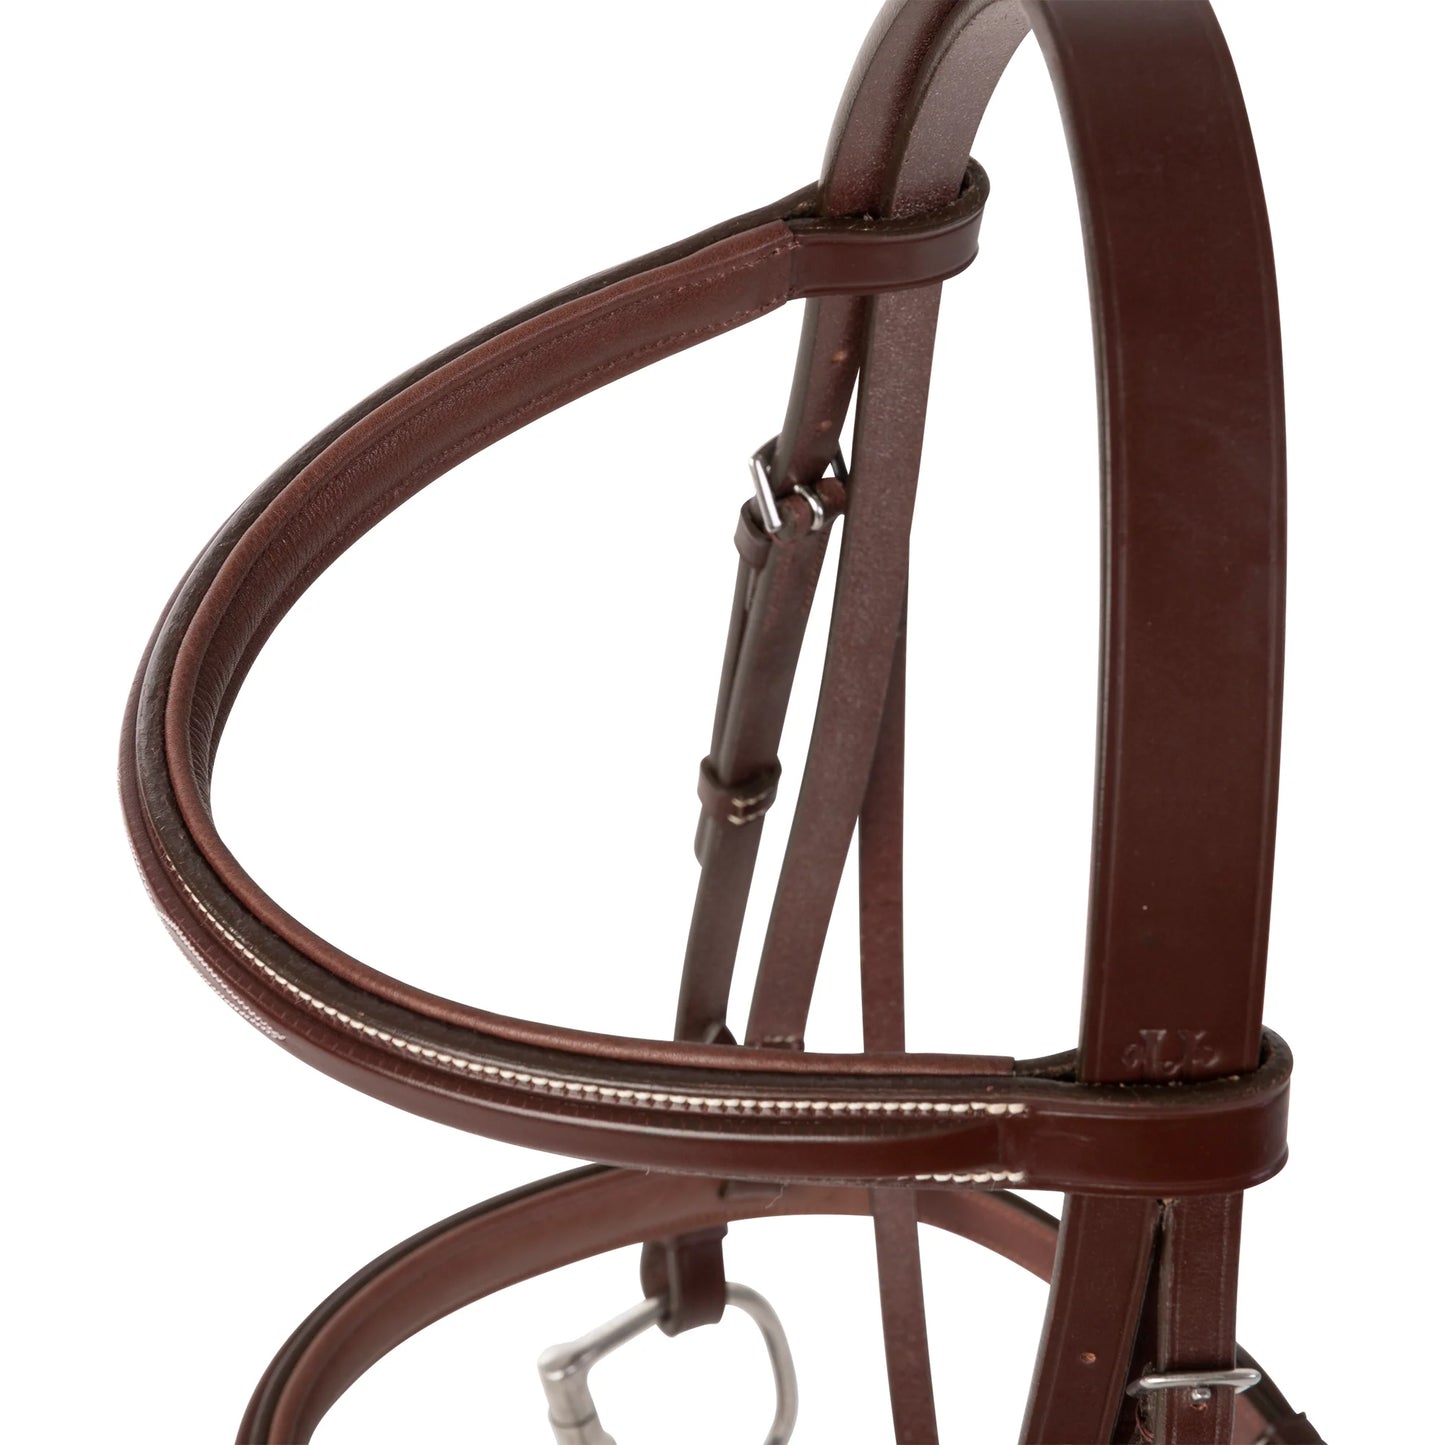 Sedgwick Fancy Stitched Leather Padded Bridle with Reins